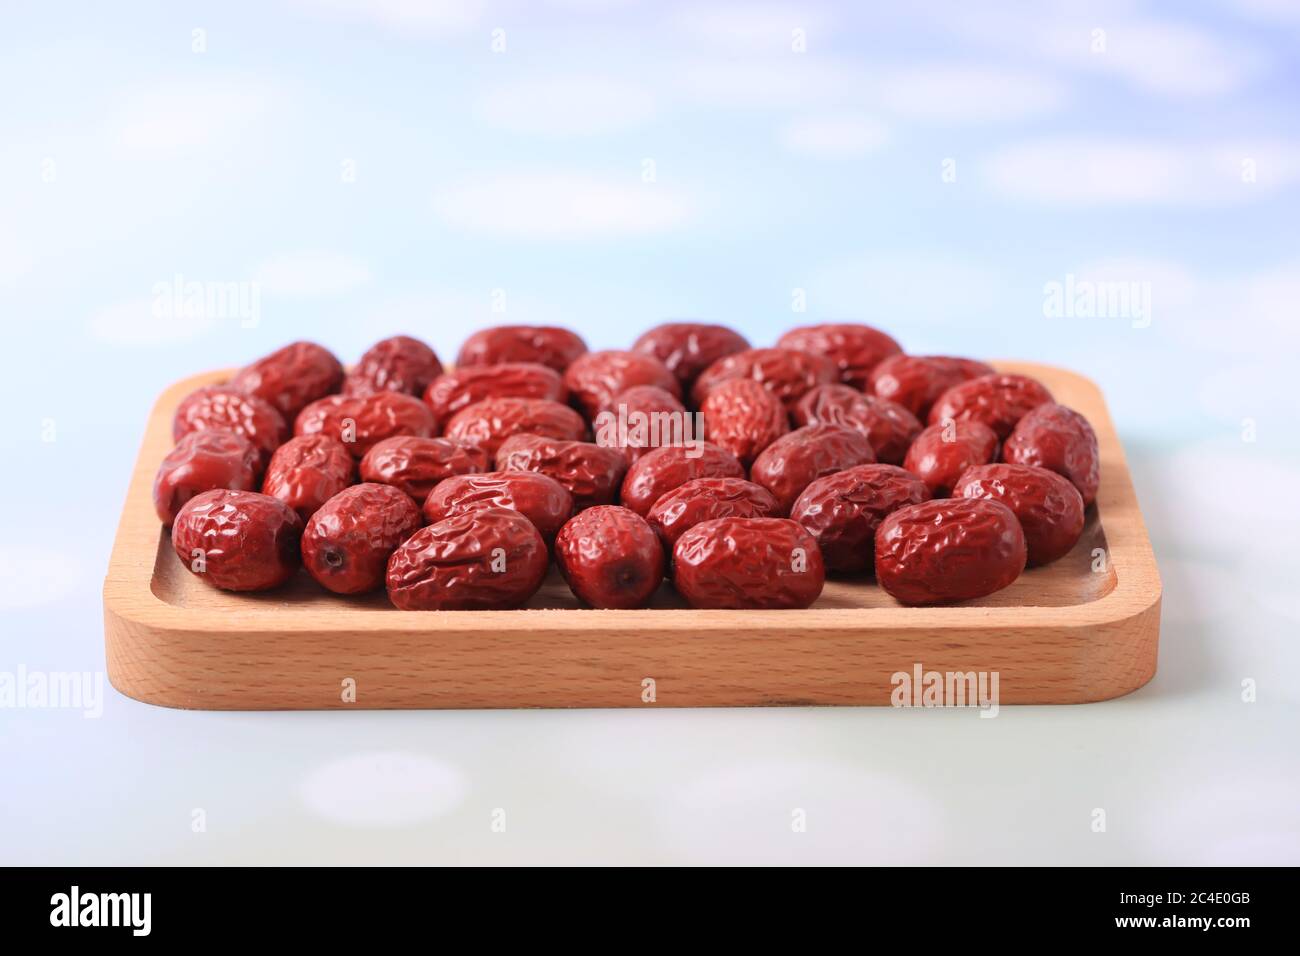 Red jujube, Fresh red dates are on the table Stock Photo